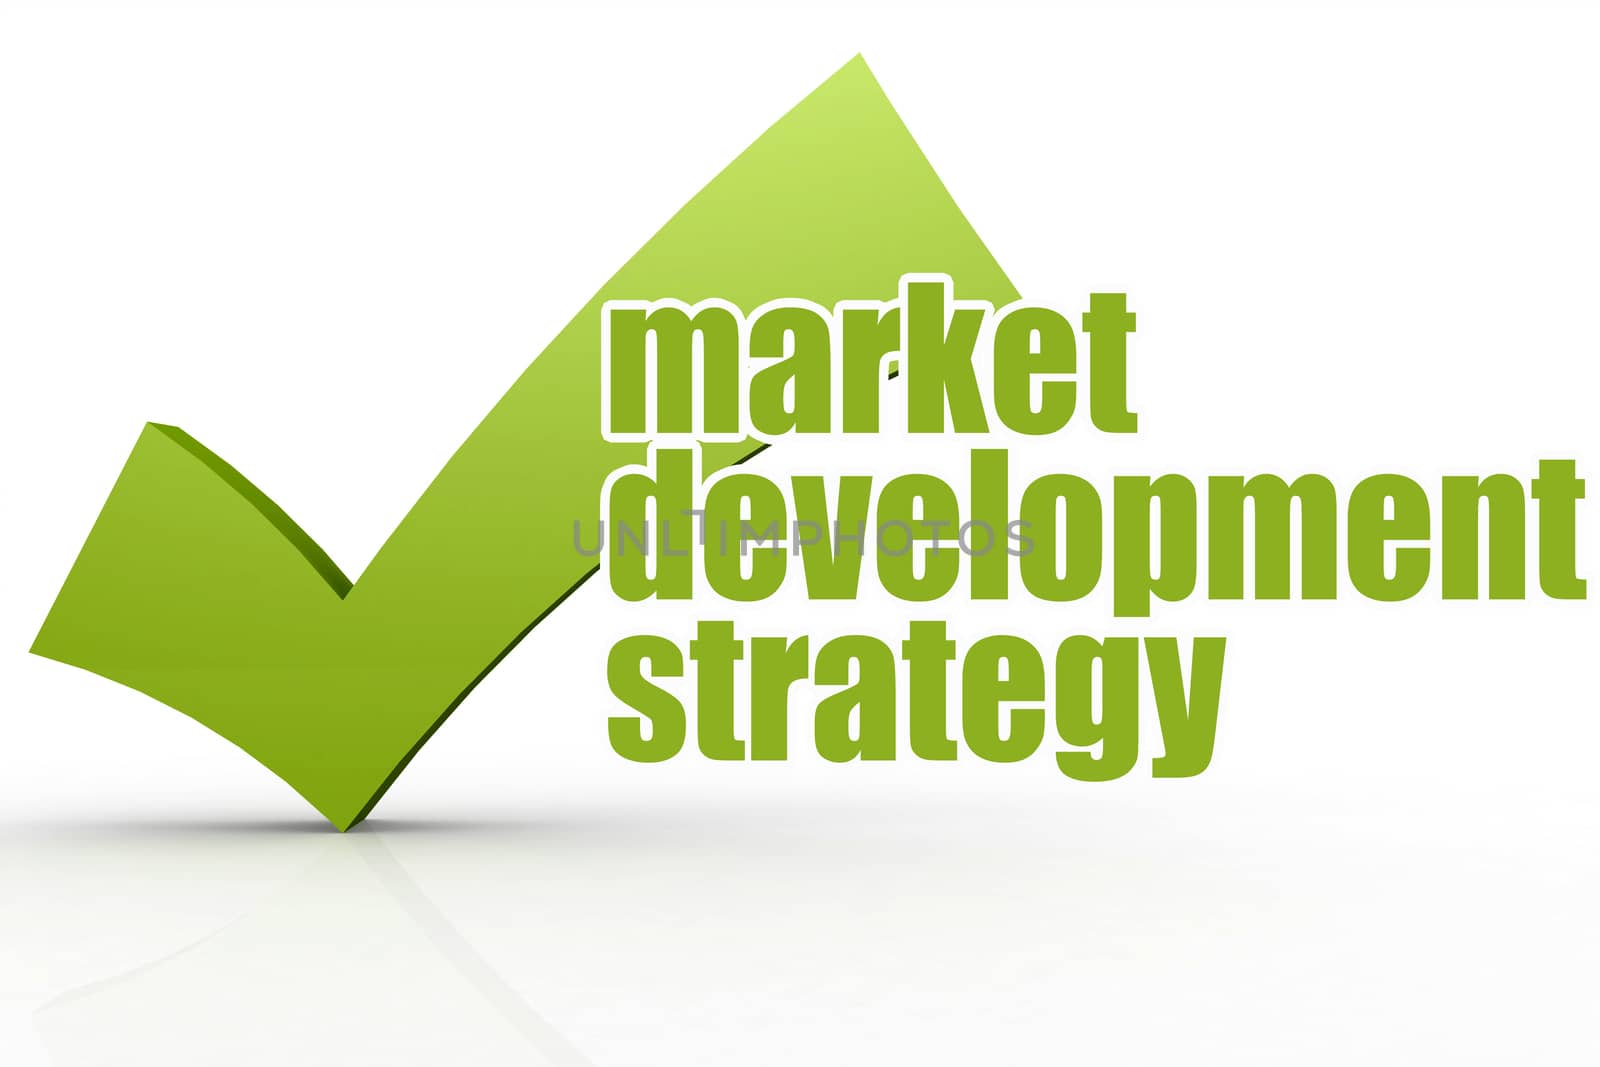 Market development strategy word with green checkmark by tang90246